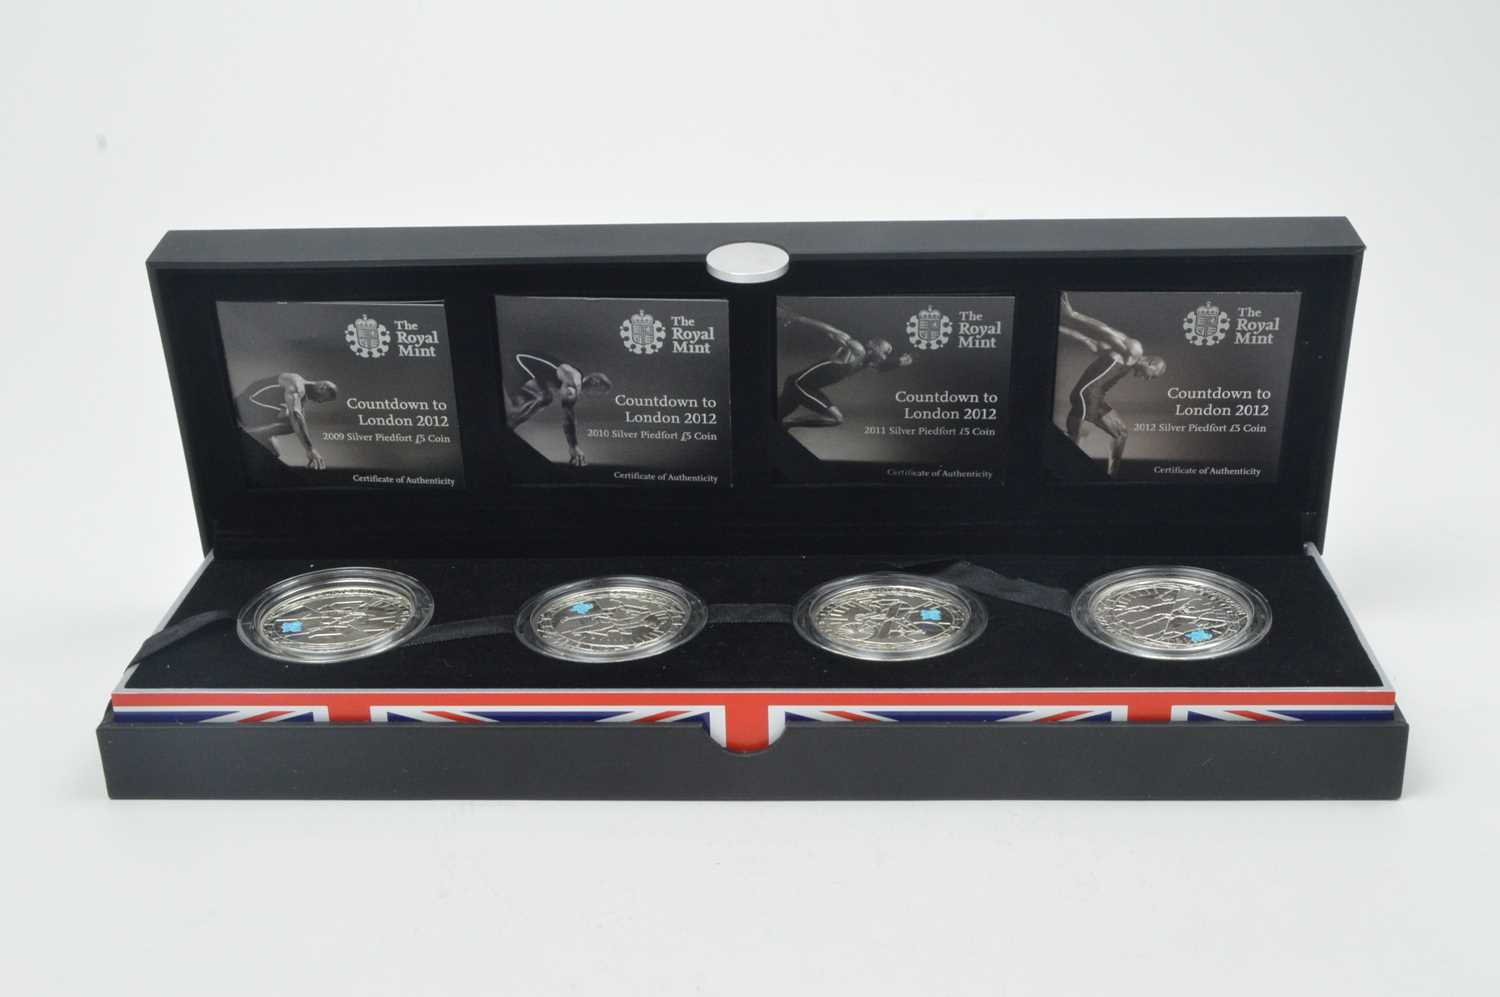 Lot 853 - Royal Mint United Kingdom: Countdown to London 2012 silver piedfort £5 four-coin set